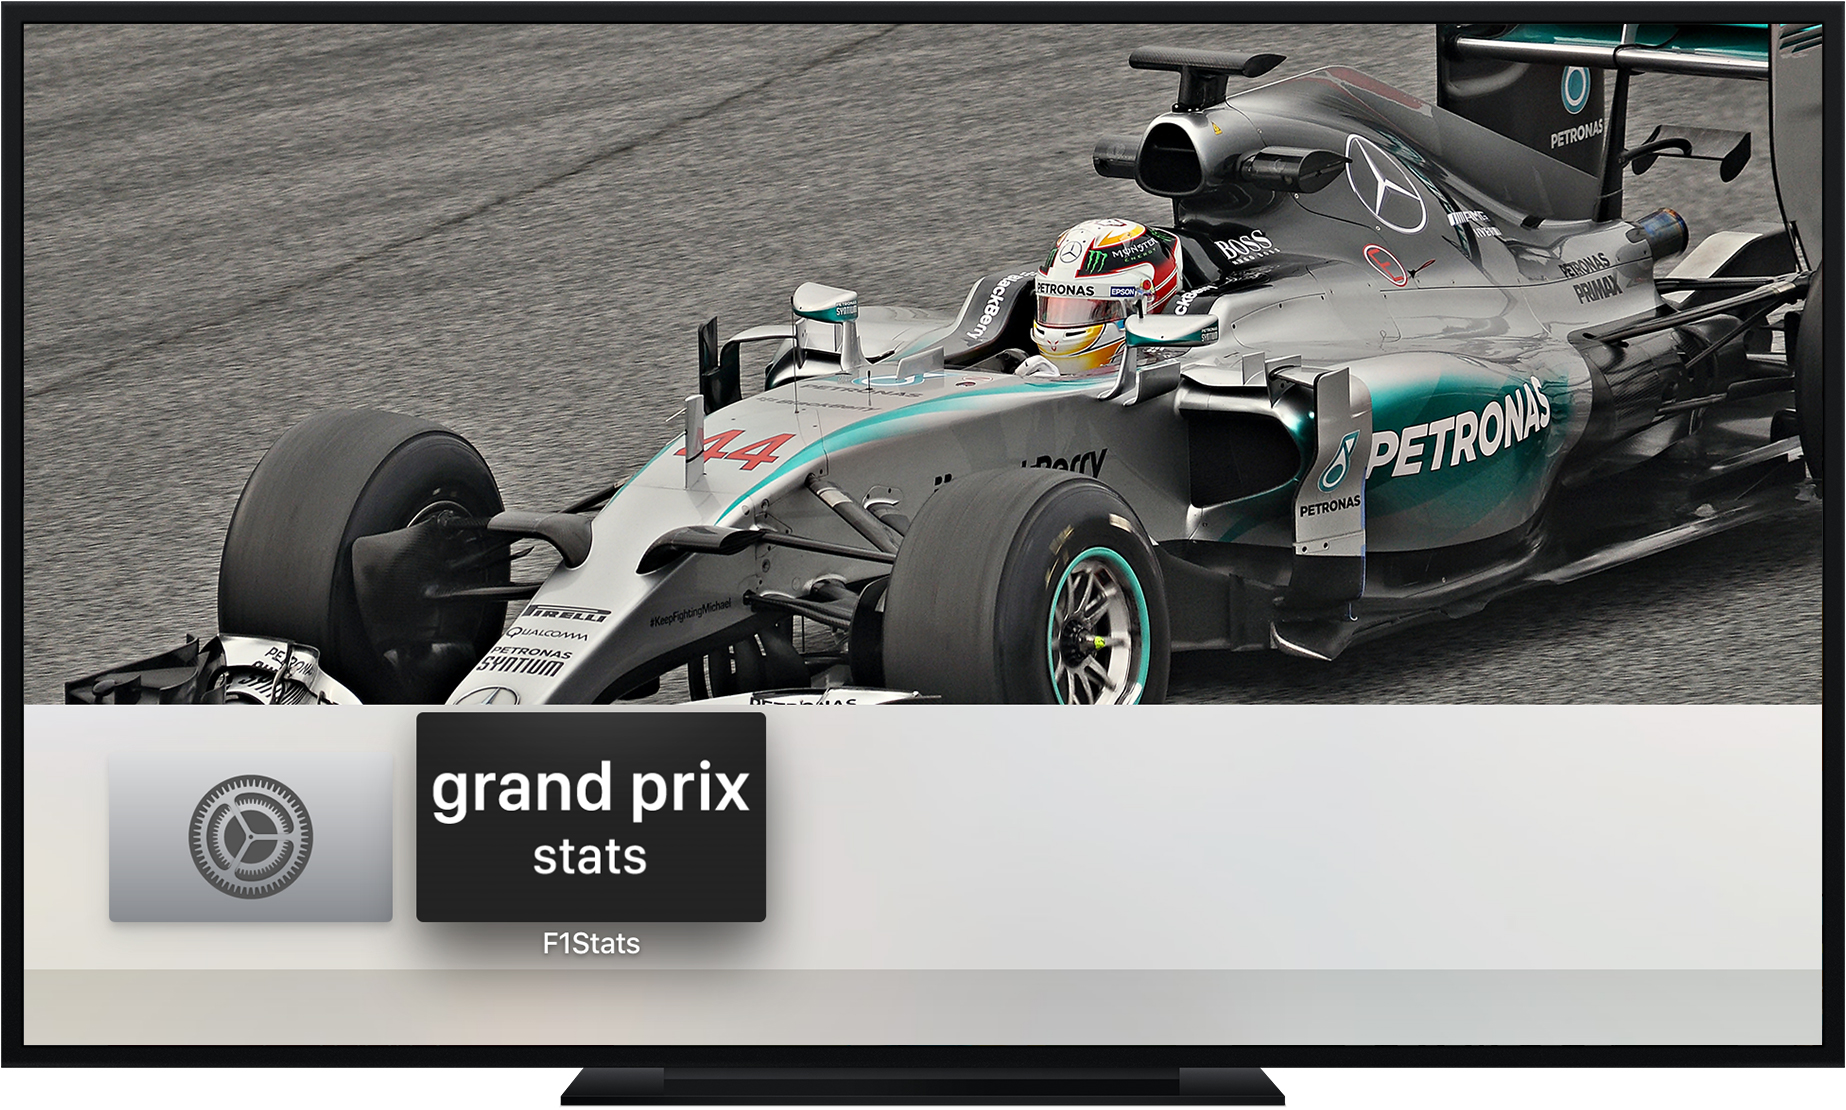 Application icon and Top Shelf image - Grand Prix Stats